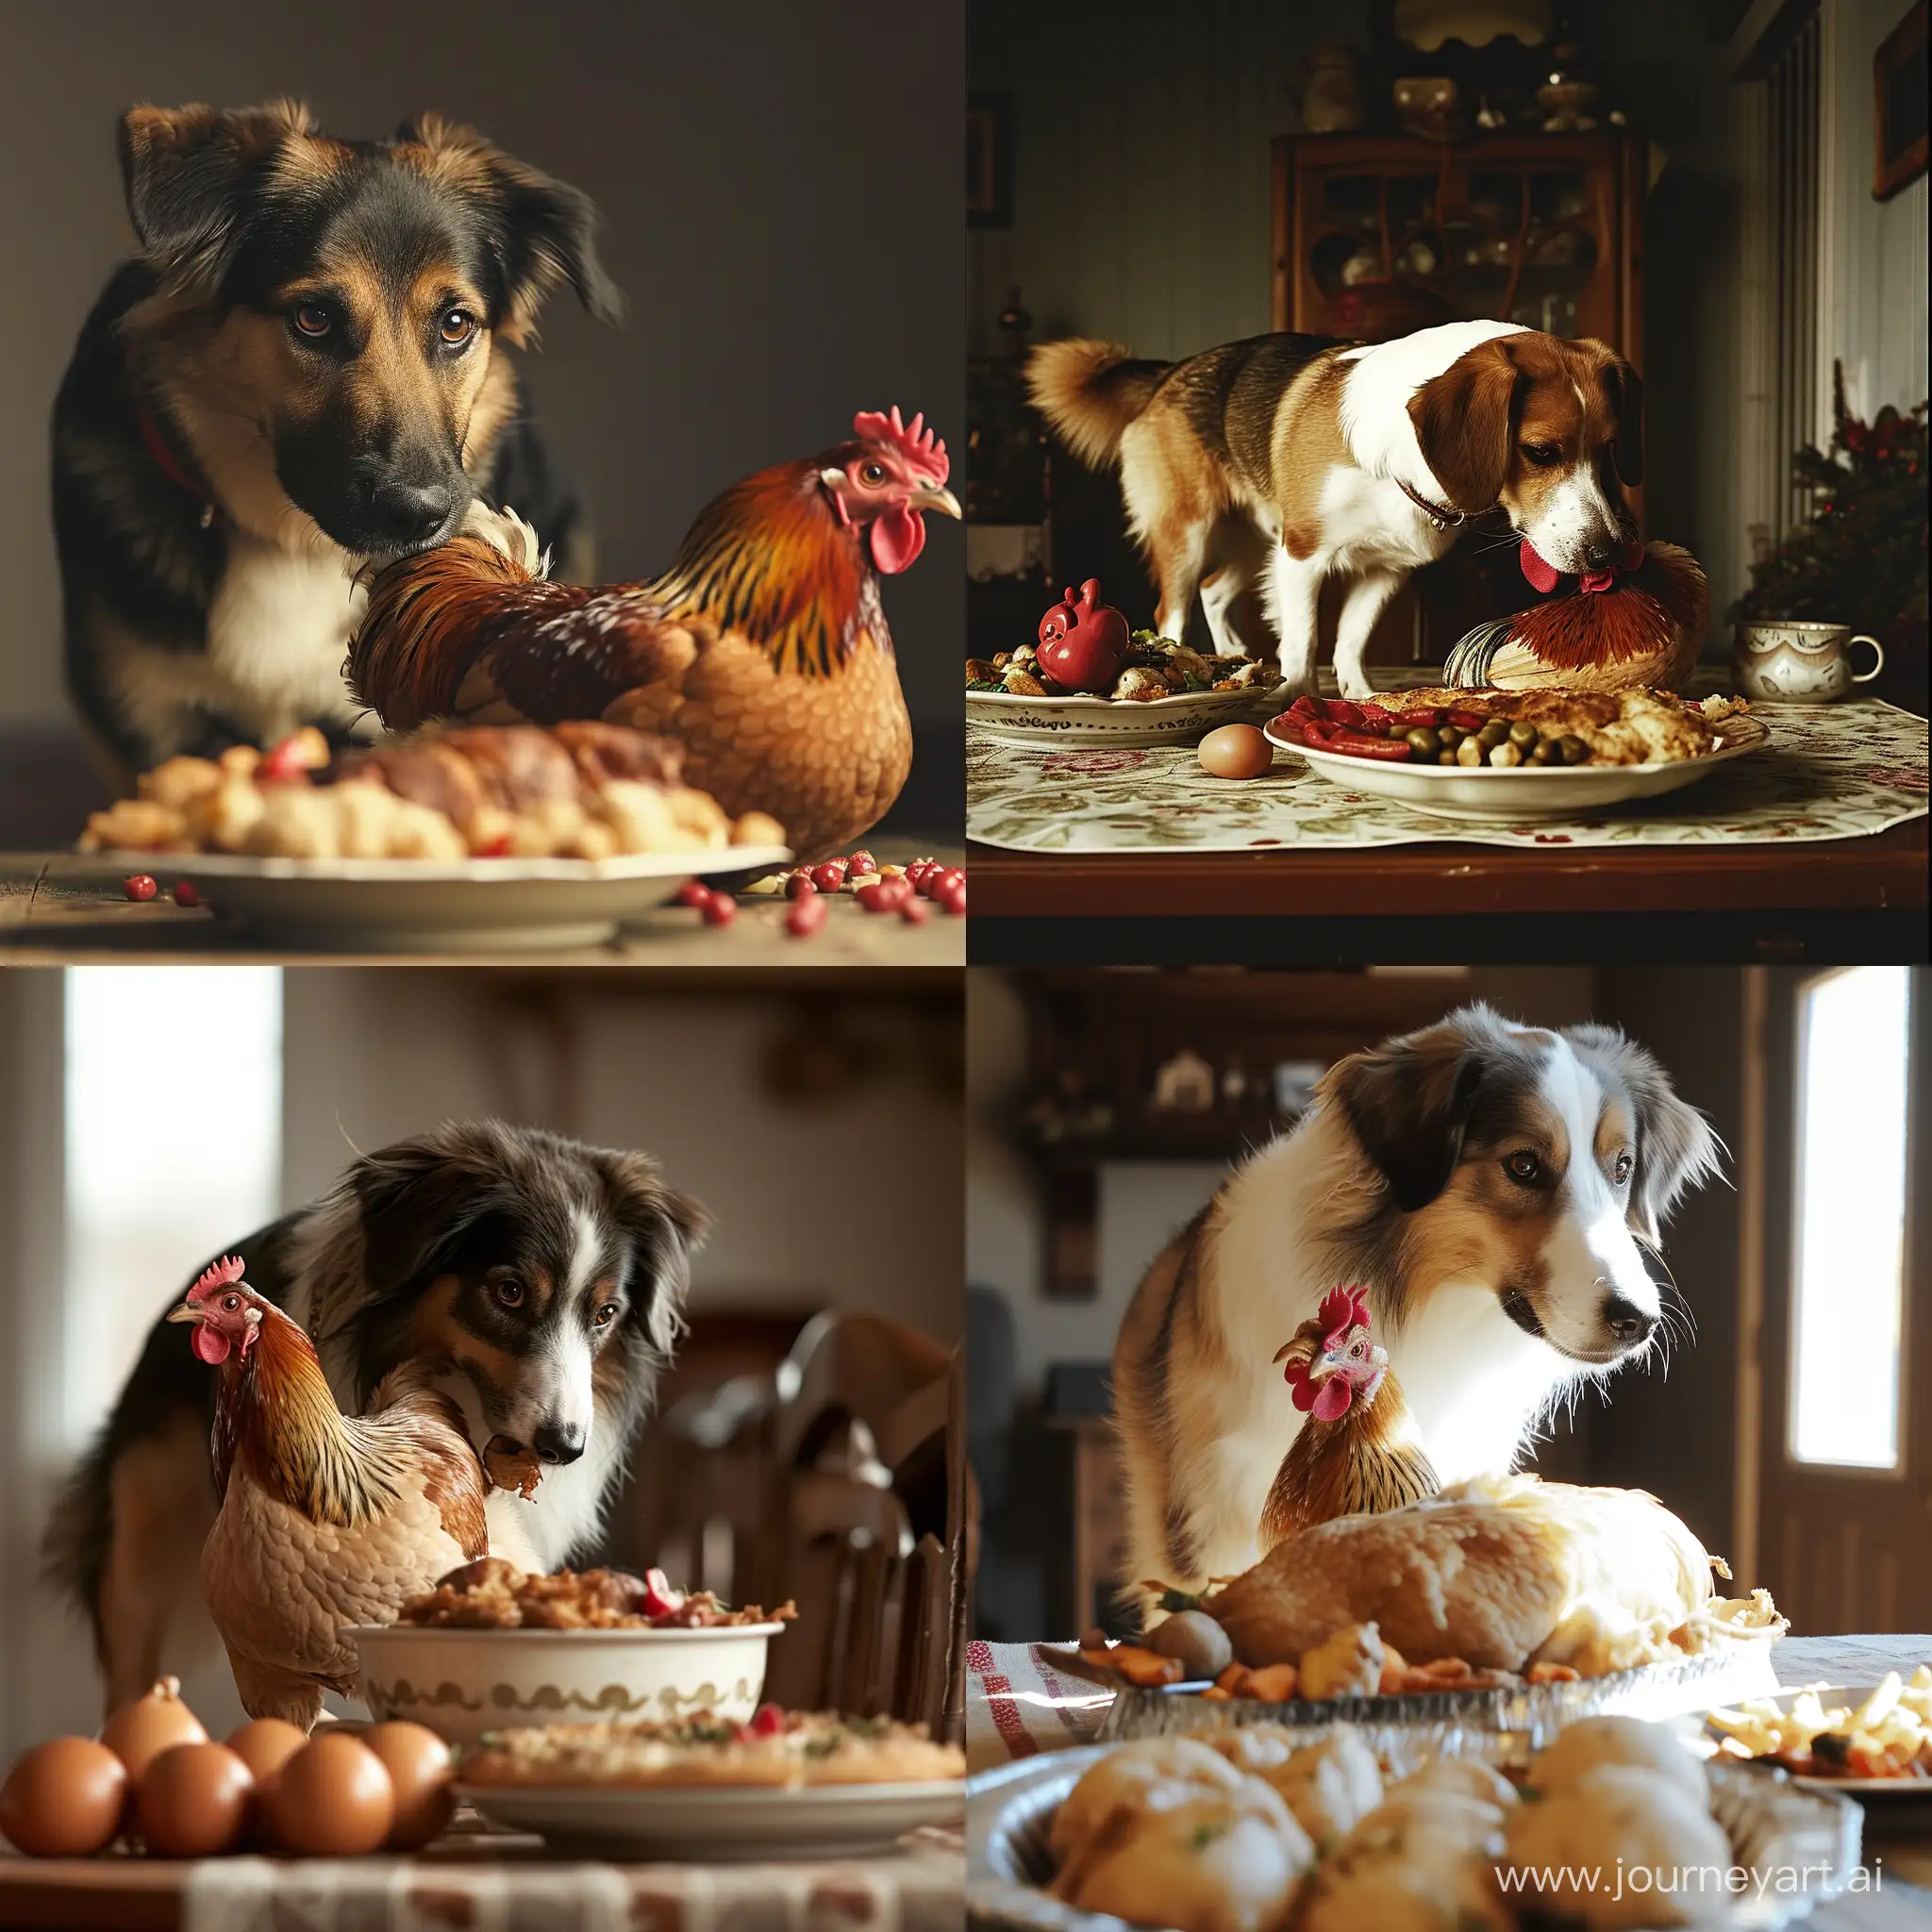 Playful-Canine-Mischief-Dogs-Culinary-Adventure-with-a-Chicken-Companion